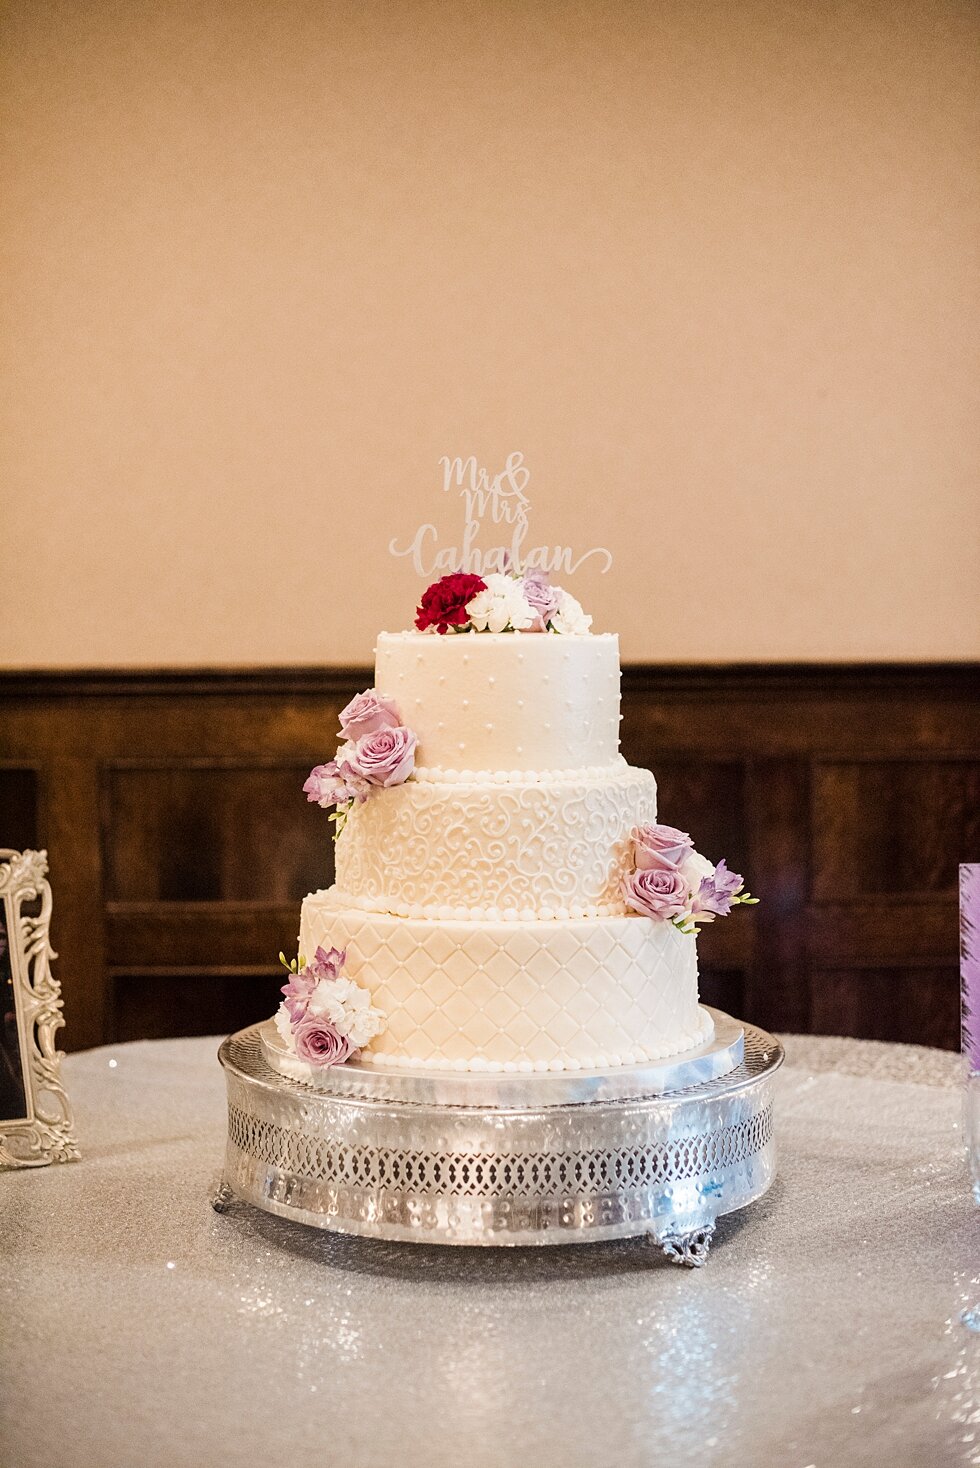  Simplistic white and floral wedding cake at the wedding reception for the bride and groom. wedding ceremony details stunning photography married midwest louisville kentucky #weddingphoto #love #justmarried #midwestphotographer #kywedding #louisville